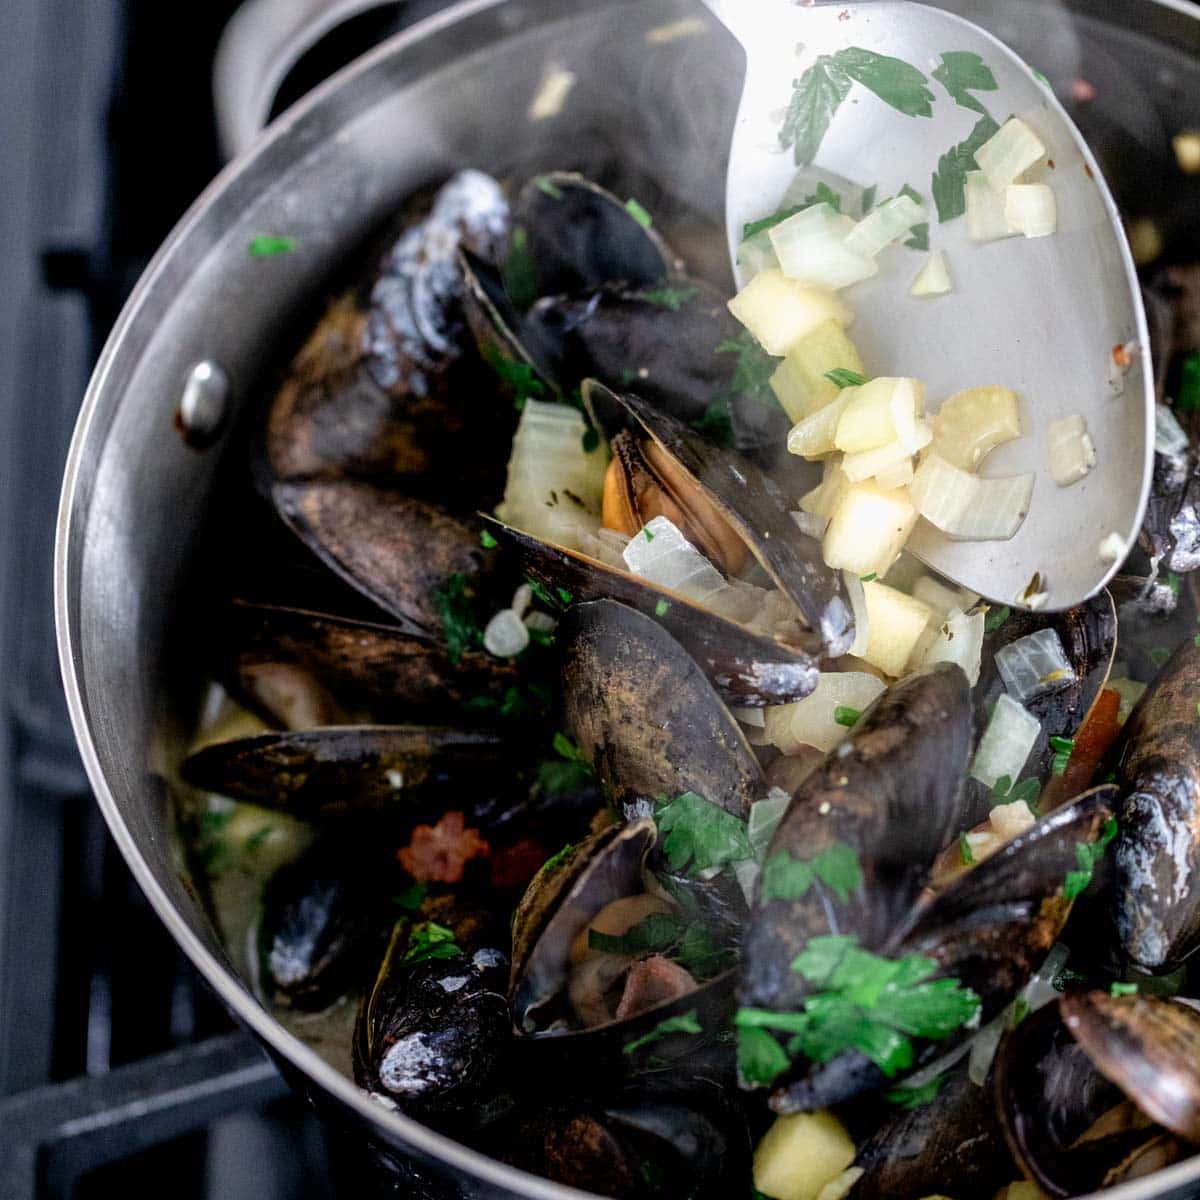 How to Cook Mussels: stir together to coat the cooked mussels in the flavorings and sauce.